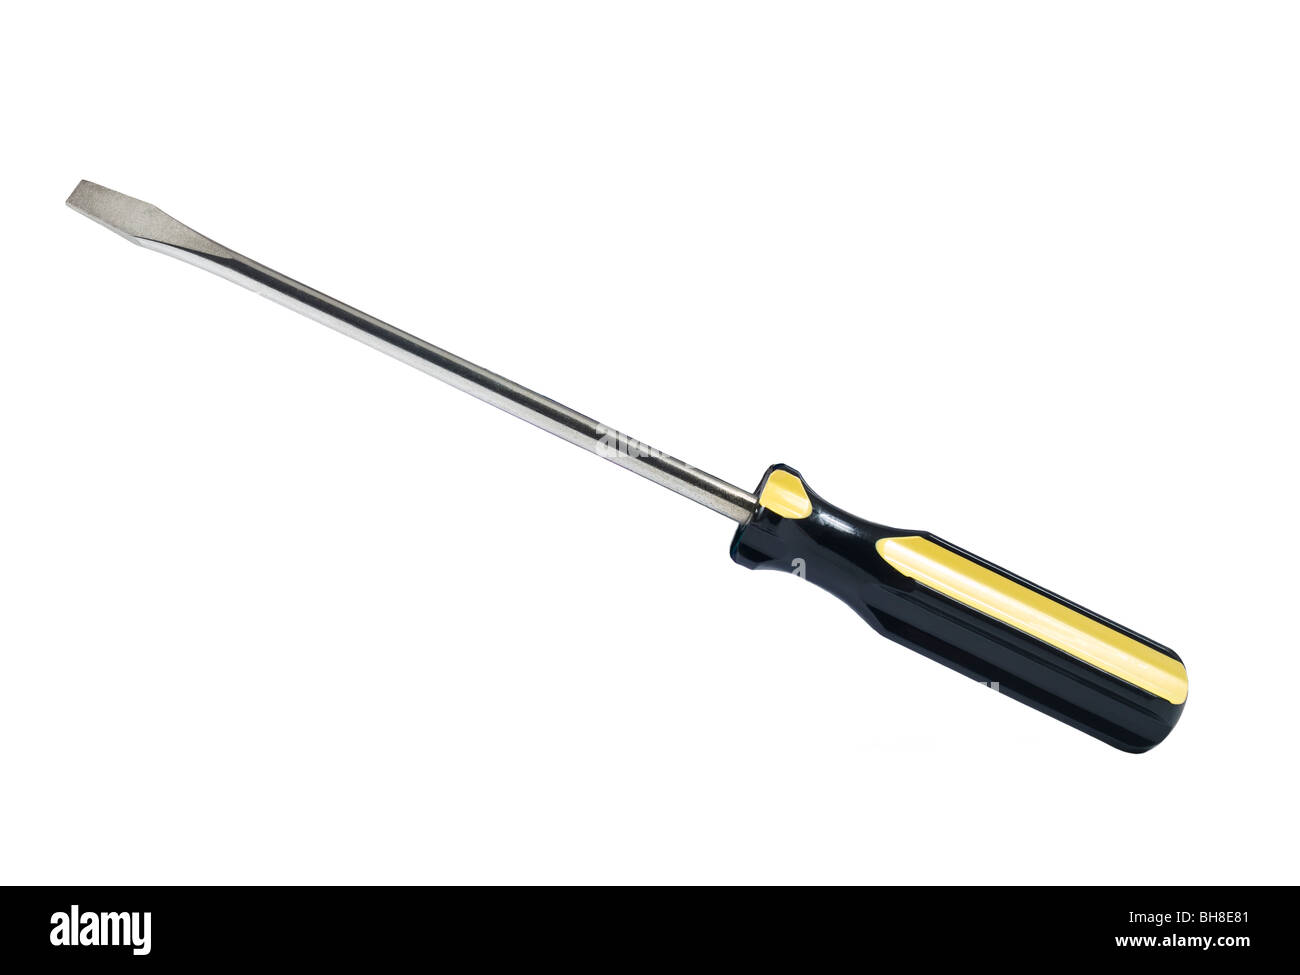 A screwdriver isolated over white. Stock Photo